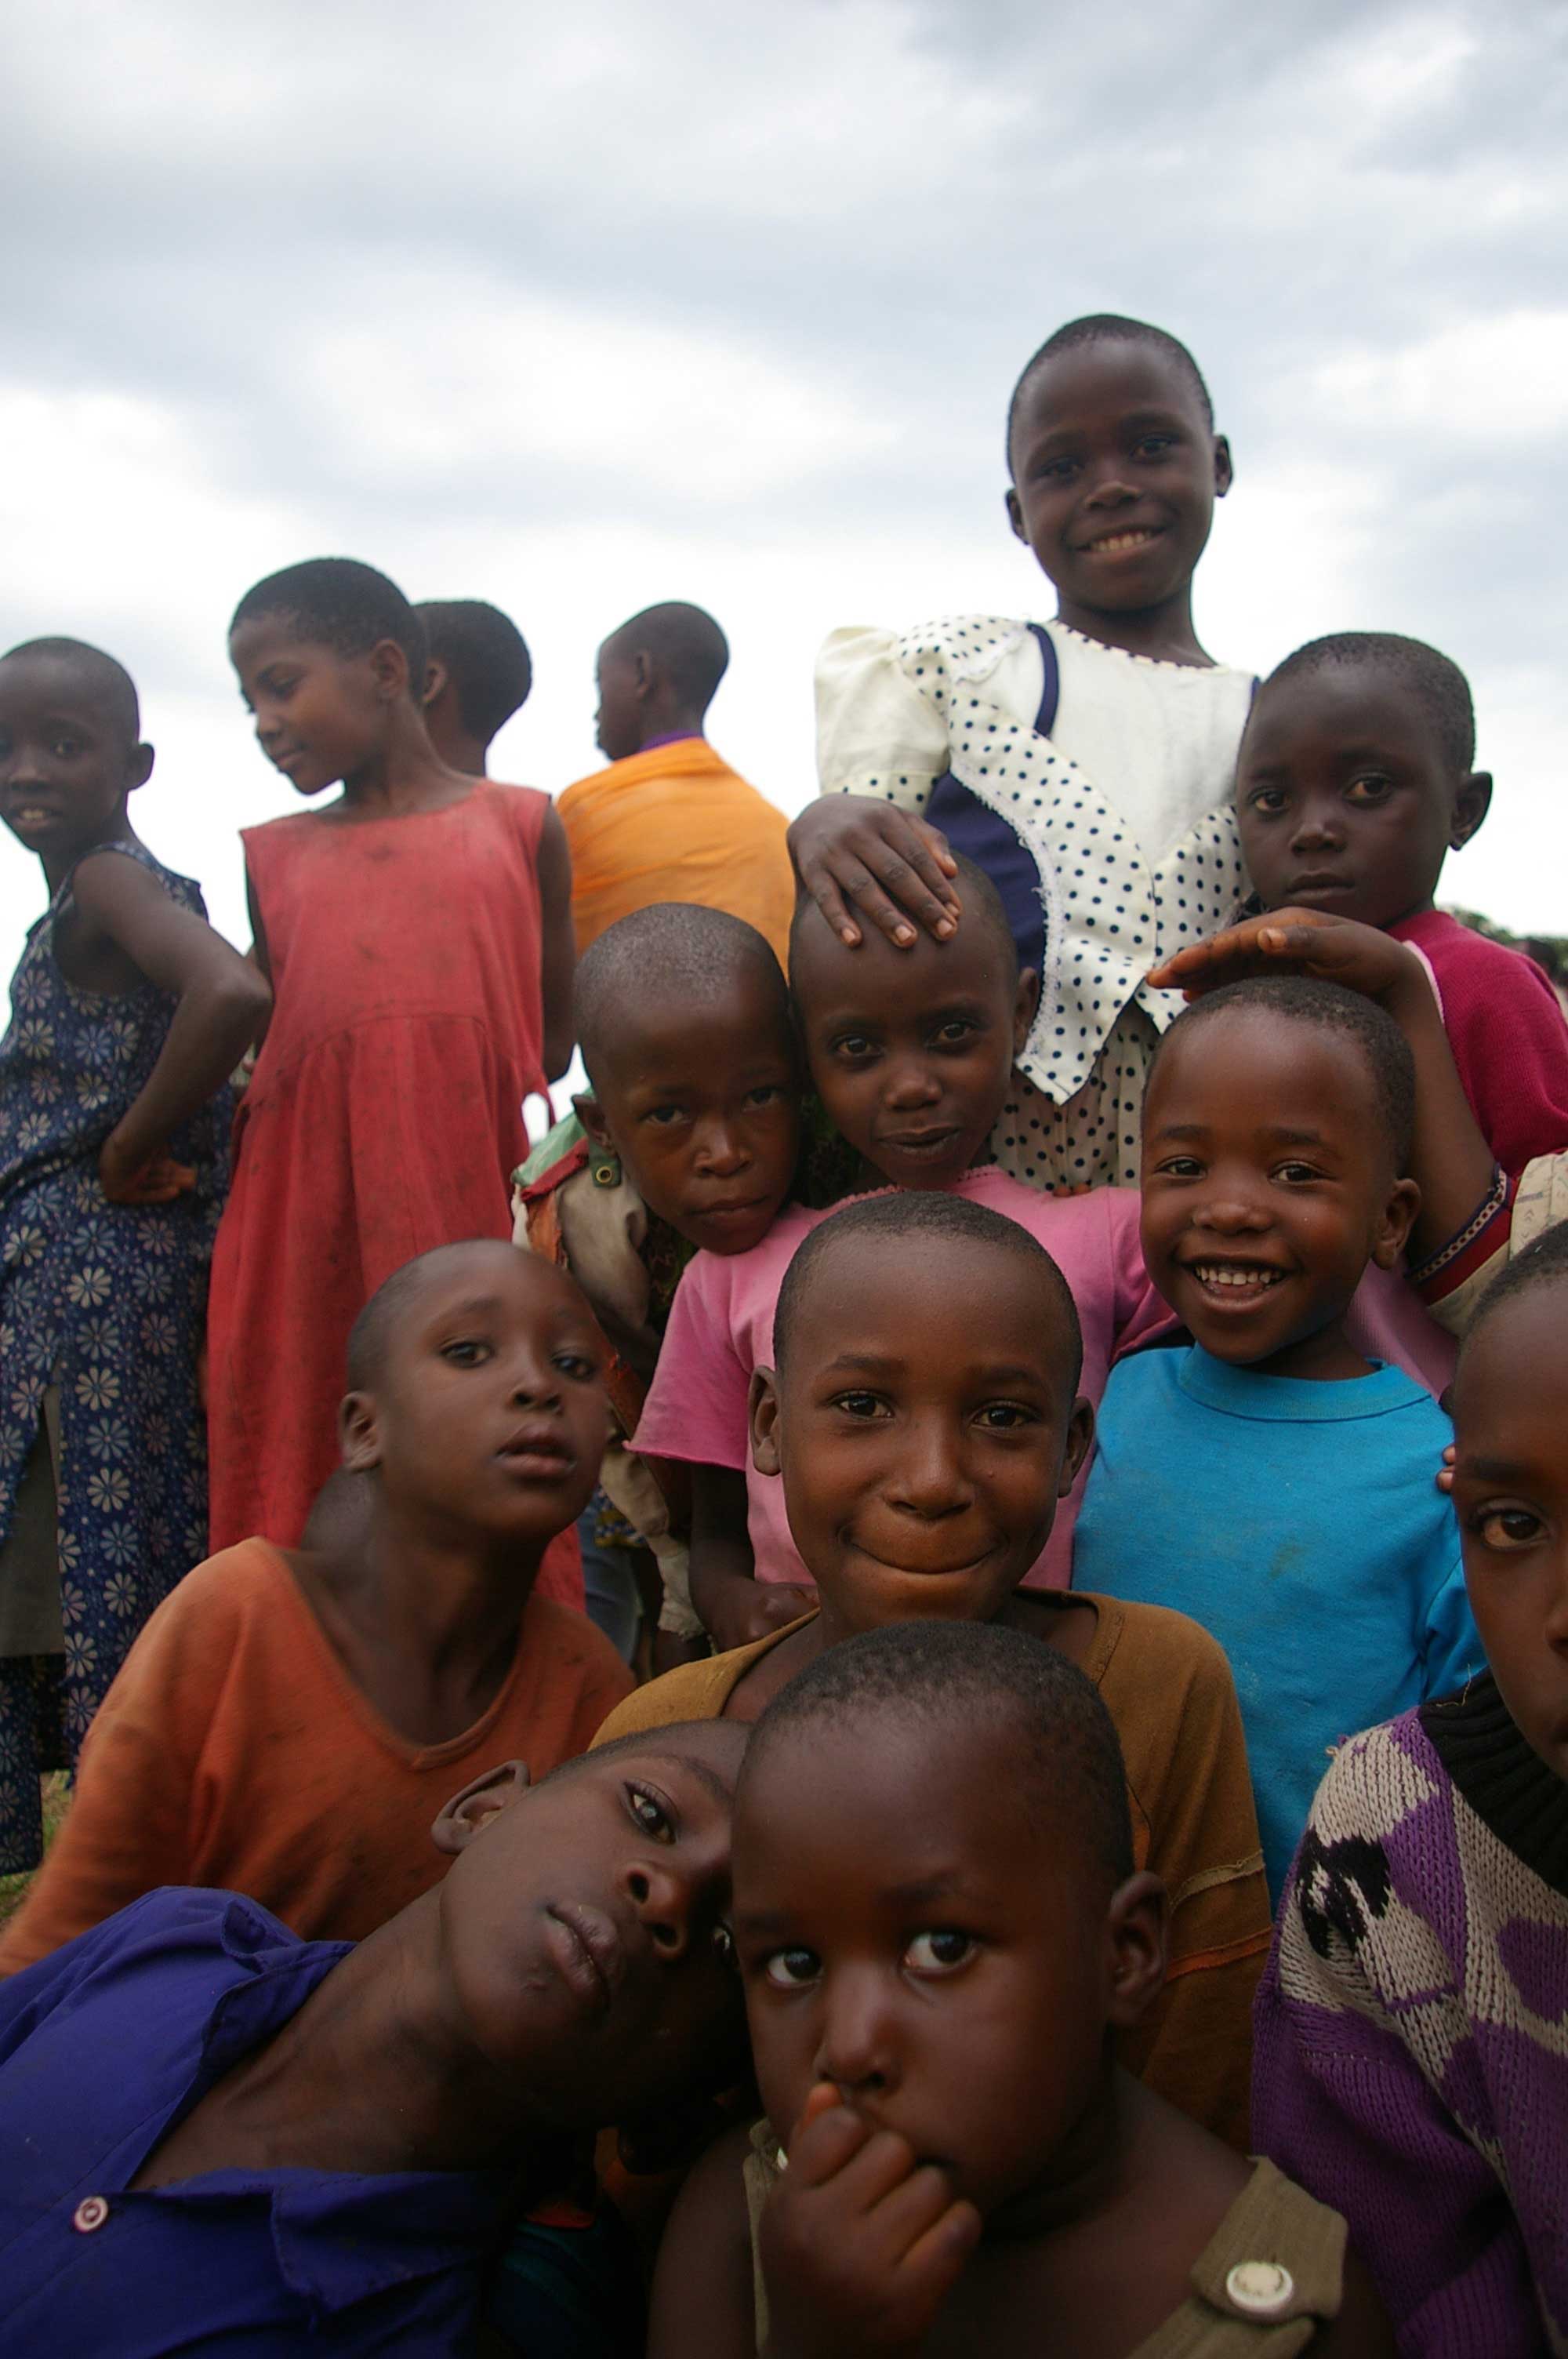 Children at Imbabazi Orphanage smiling for the camera